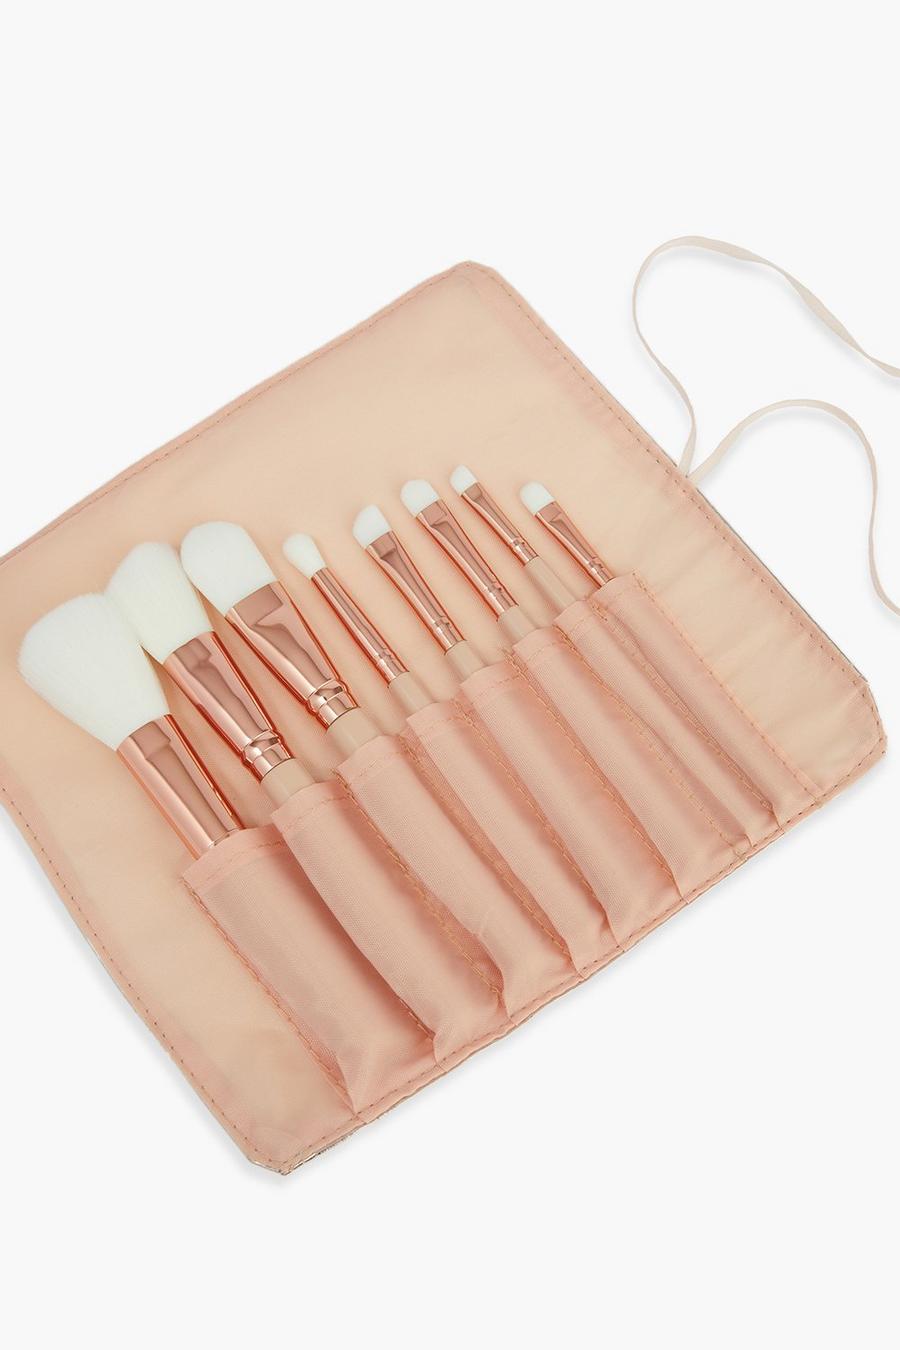 Pink Academy Of Color Brushes Set With Wrap